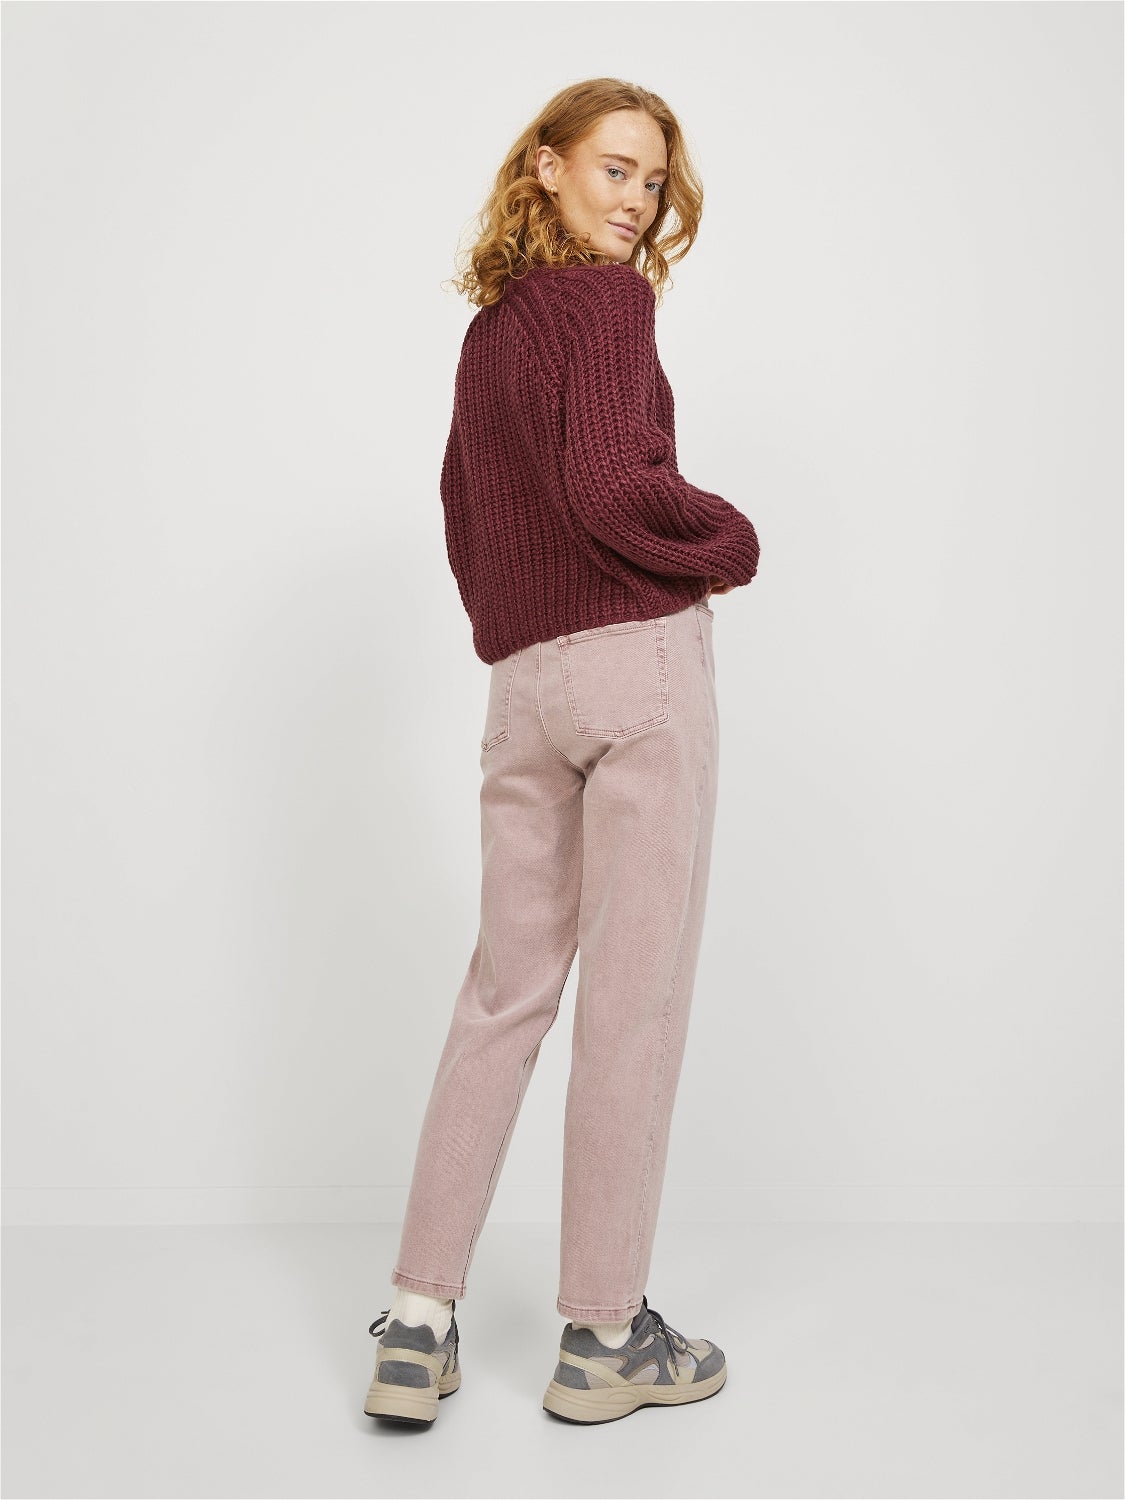 Topshop Rust Corduroy Mom Jeans | Topshop outfit, Fashion, Mom jeans